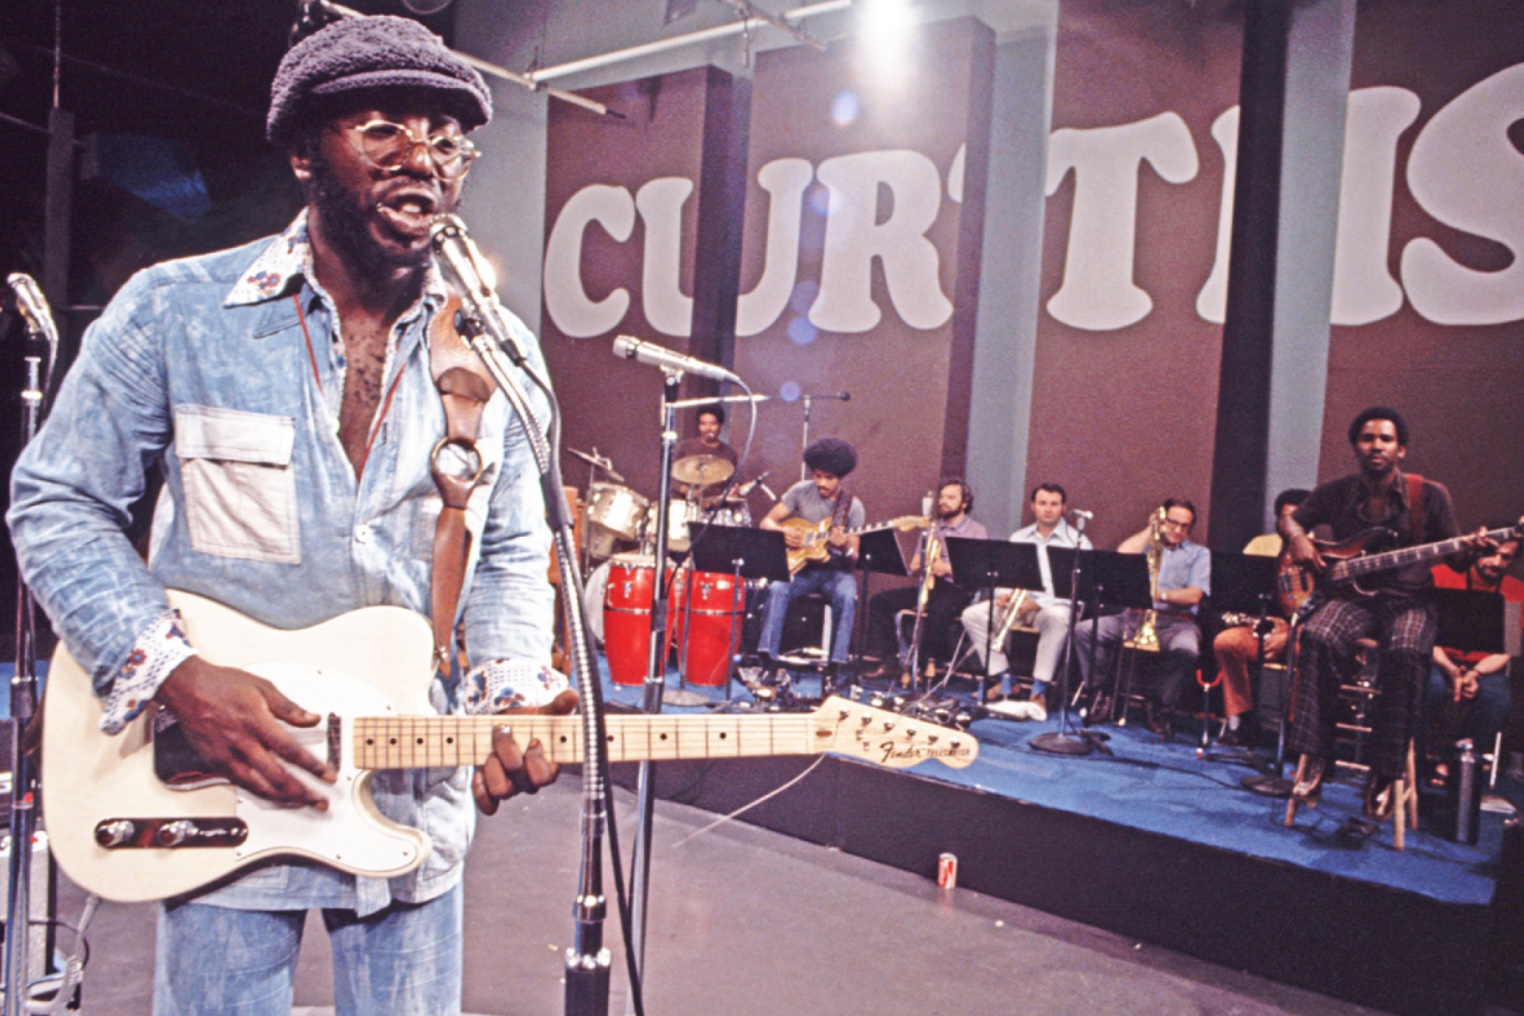 Chicago’s Own, Curtis Mayfield’s Legacy Kept Alive By Son’s Personal Experience In Life Story, The Traveling Soul